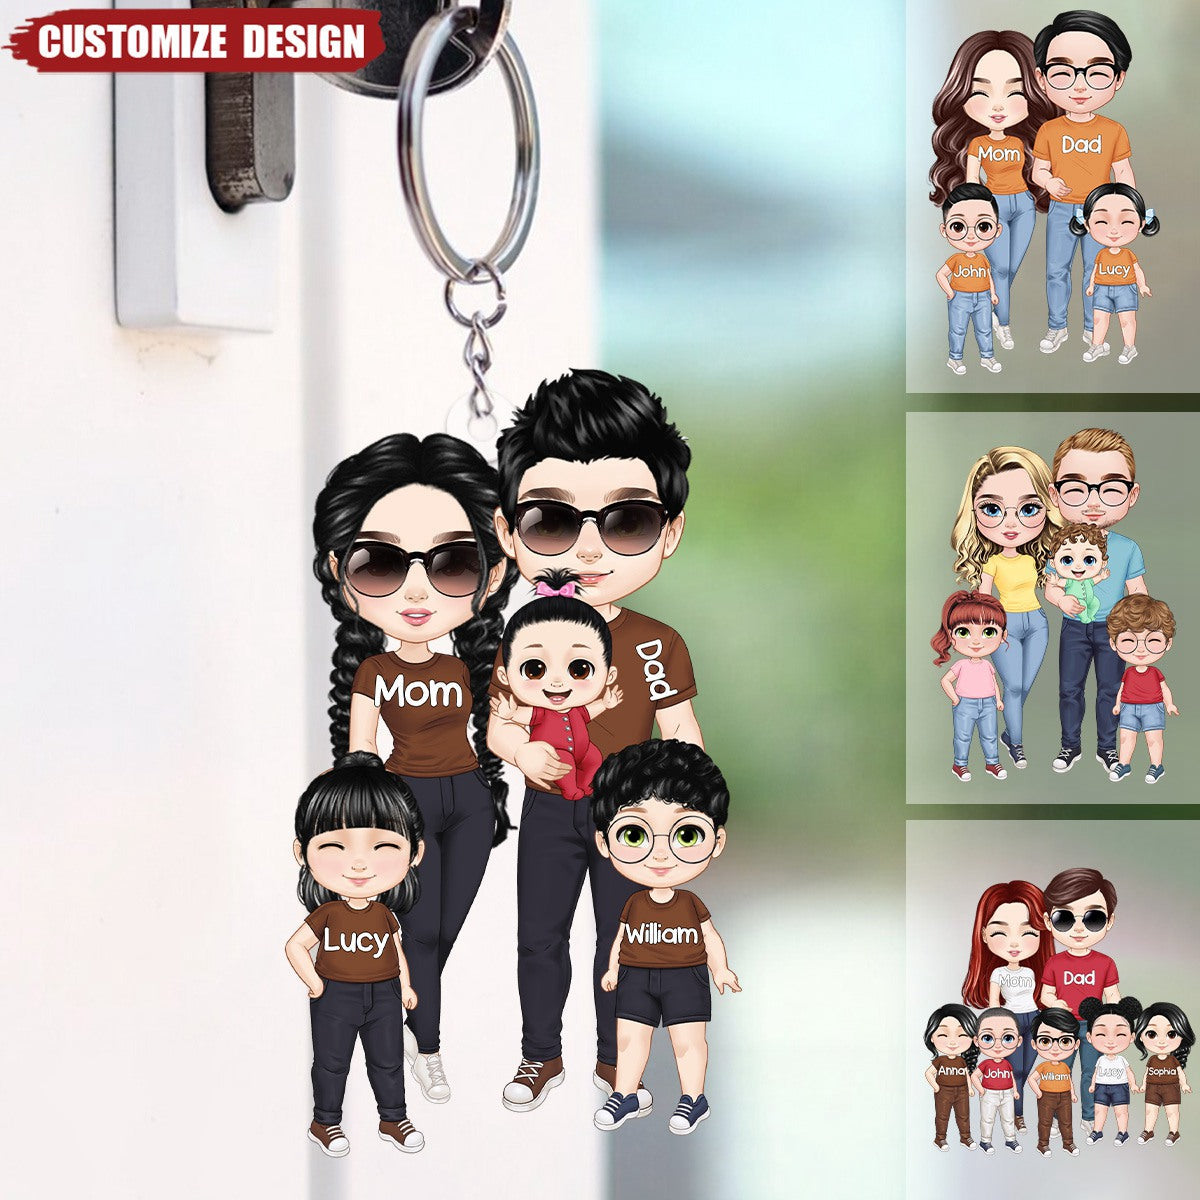 Doll Personalized Family Keychain - Gift For Family, Mom, Dad, Grandma, Grandpa